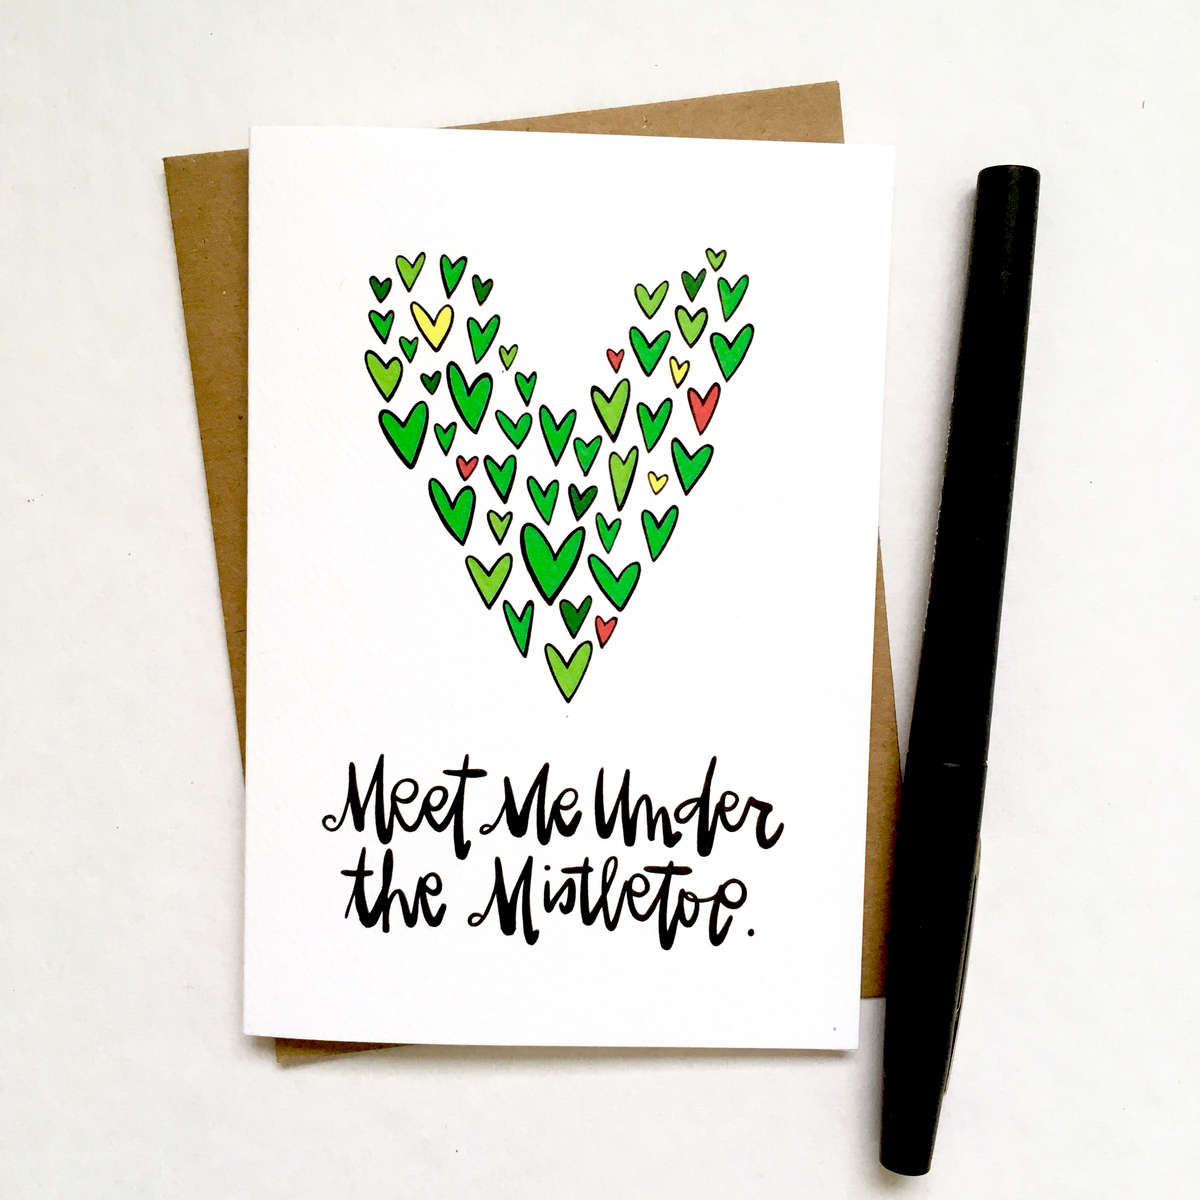 purchase herewho are you hoping to meet under the mistletoe?? // this brand new super cute holiday card is the perfect way to snag that kiss, yo // get yours while they're still in stock!each card is:printed on 100# recycled + responsibly-sourced paper //measuring 3.5{quote} x 5{quote} //accompanied by a recycled kraft paper 4-bar envelope //professionally printed on a digital press //individually packaged in sealed cellophane sleeve //made with mad love in colorado, usa. 